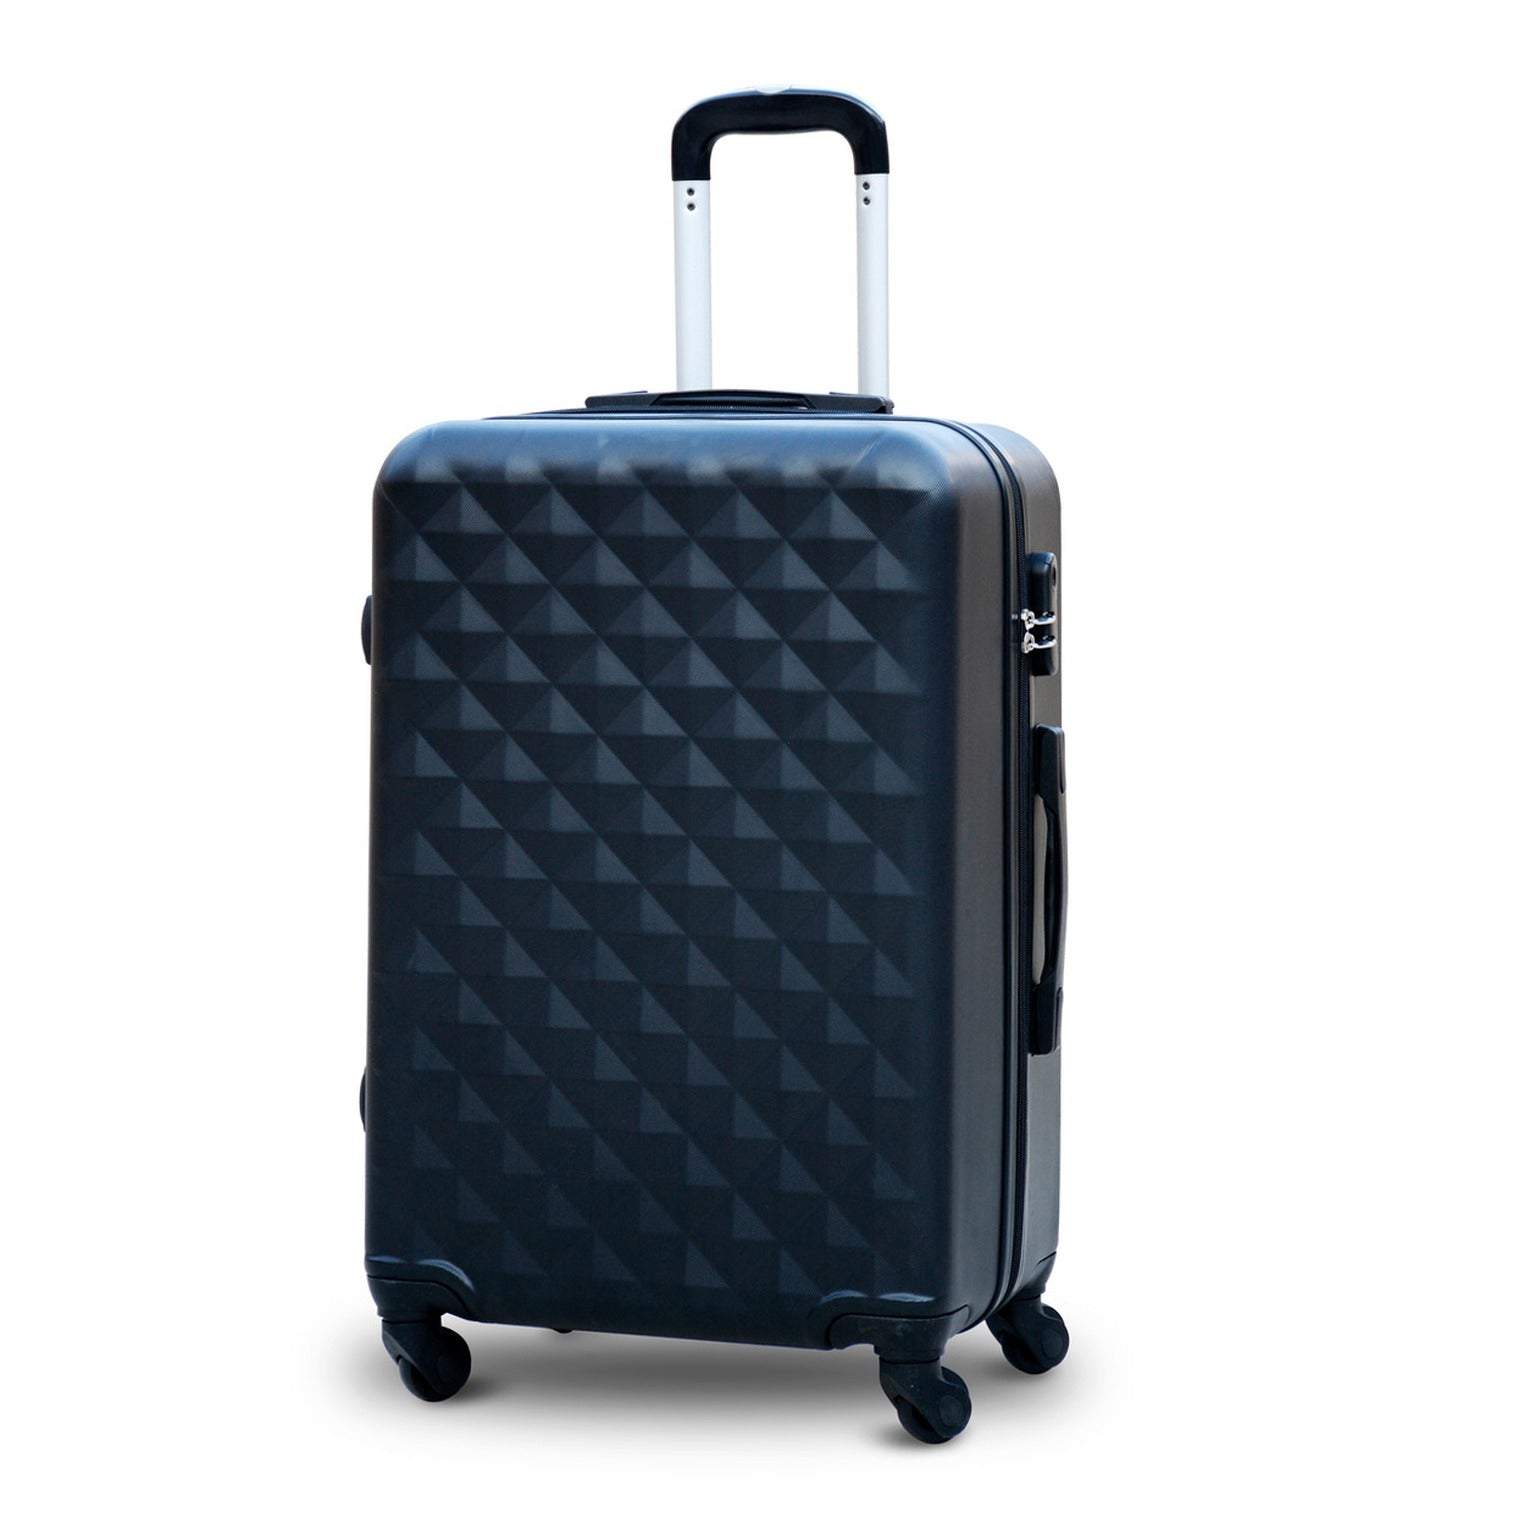 28" Diamond Cut ABS Lightweight Luggage Bag With Spinner Wheel